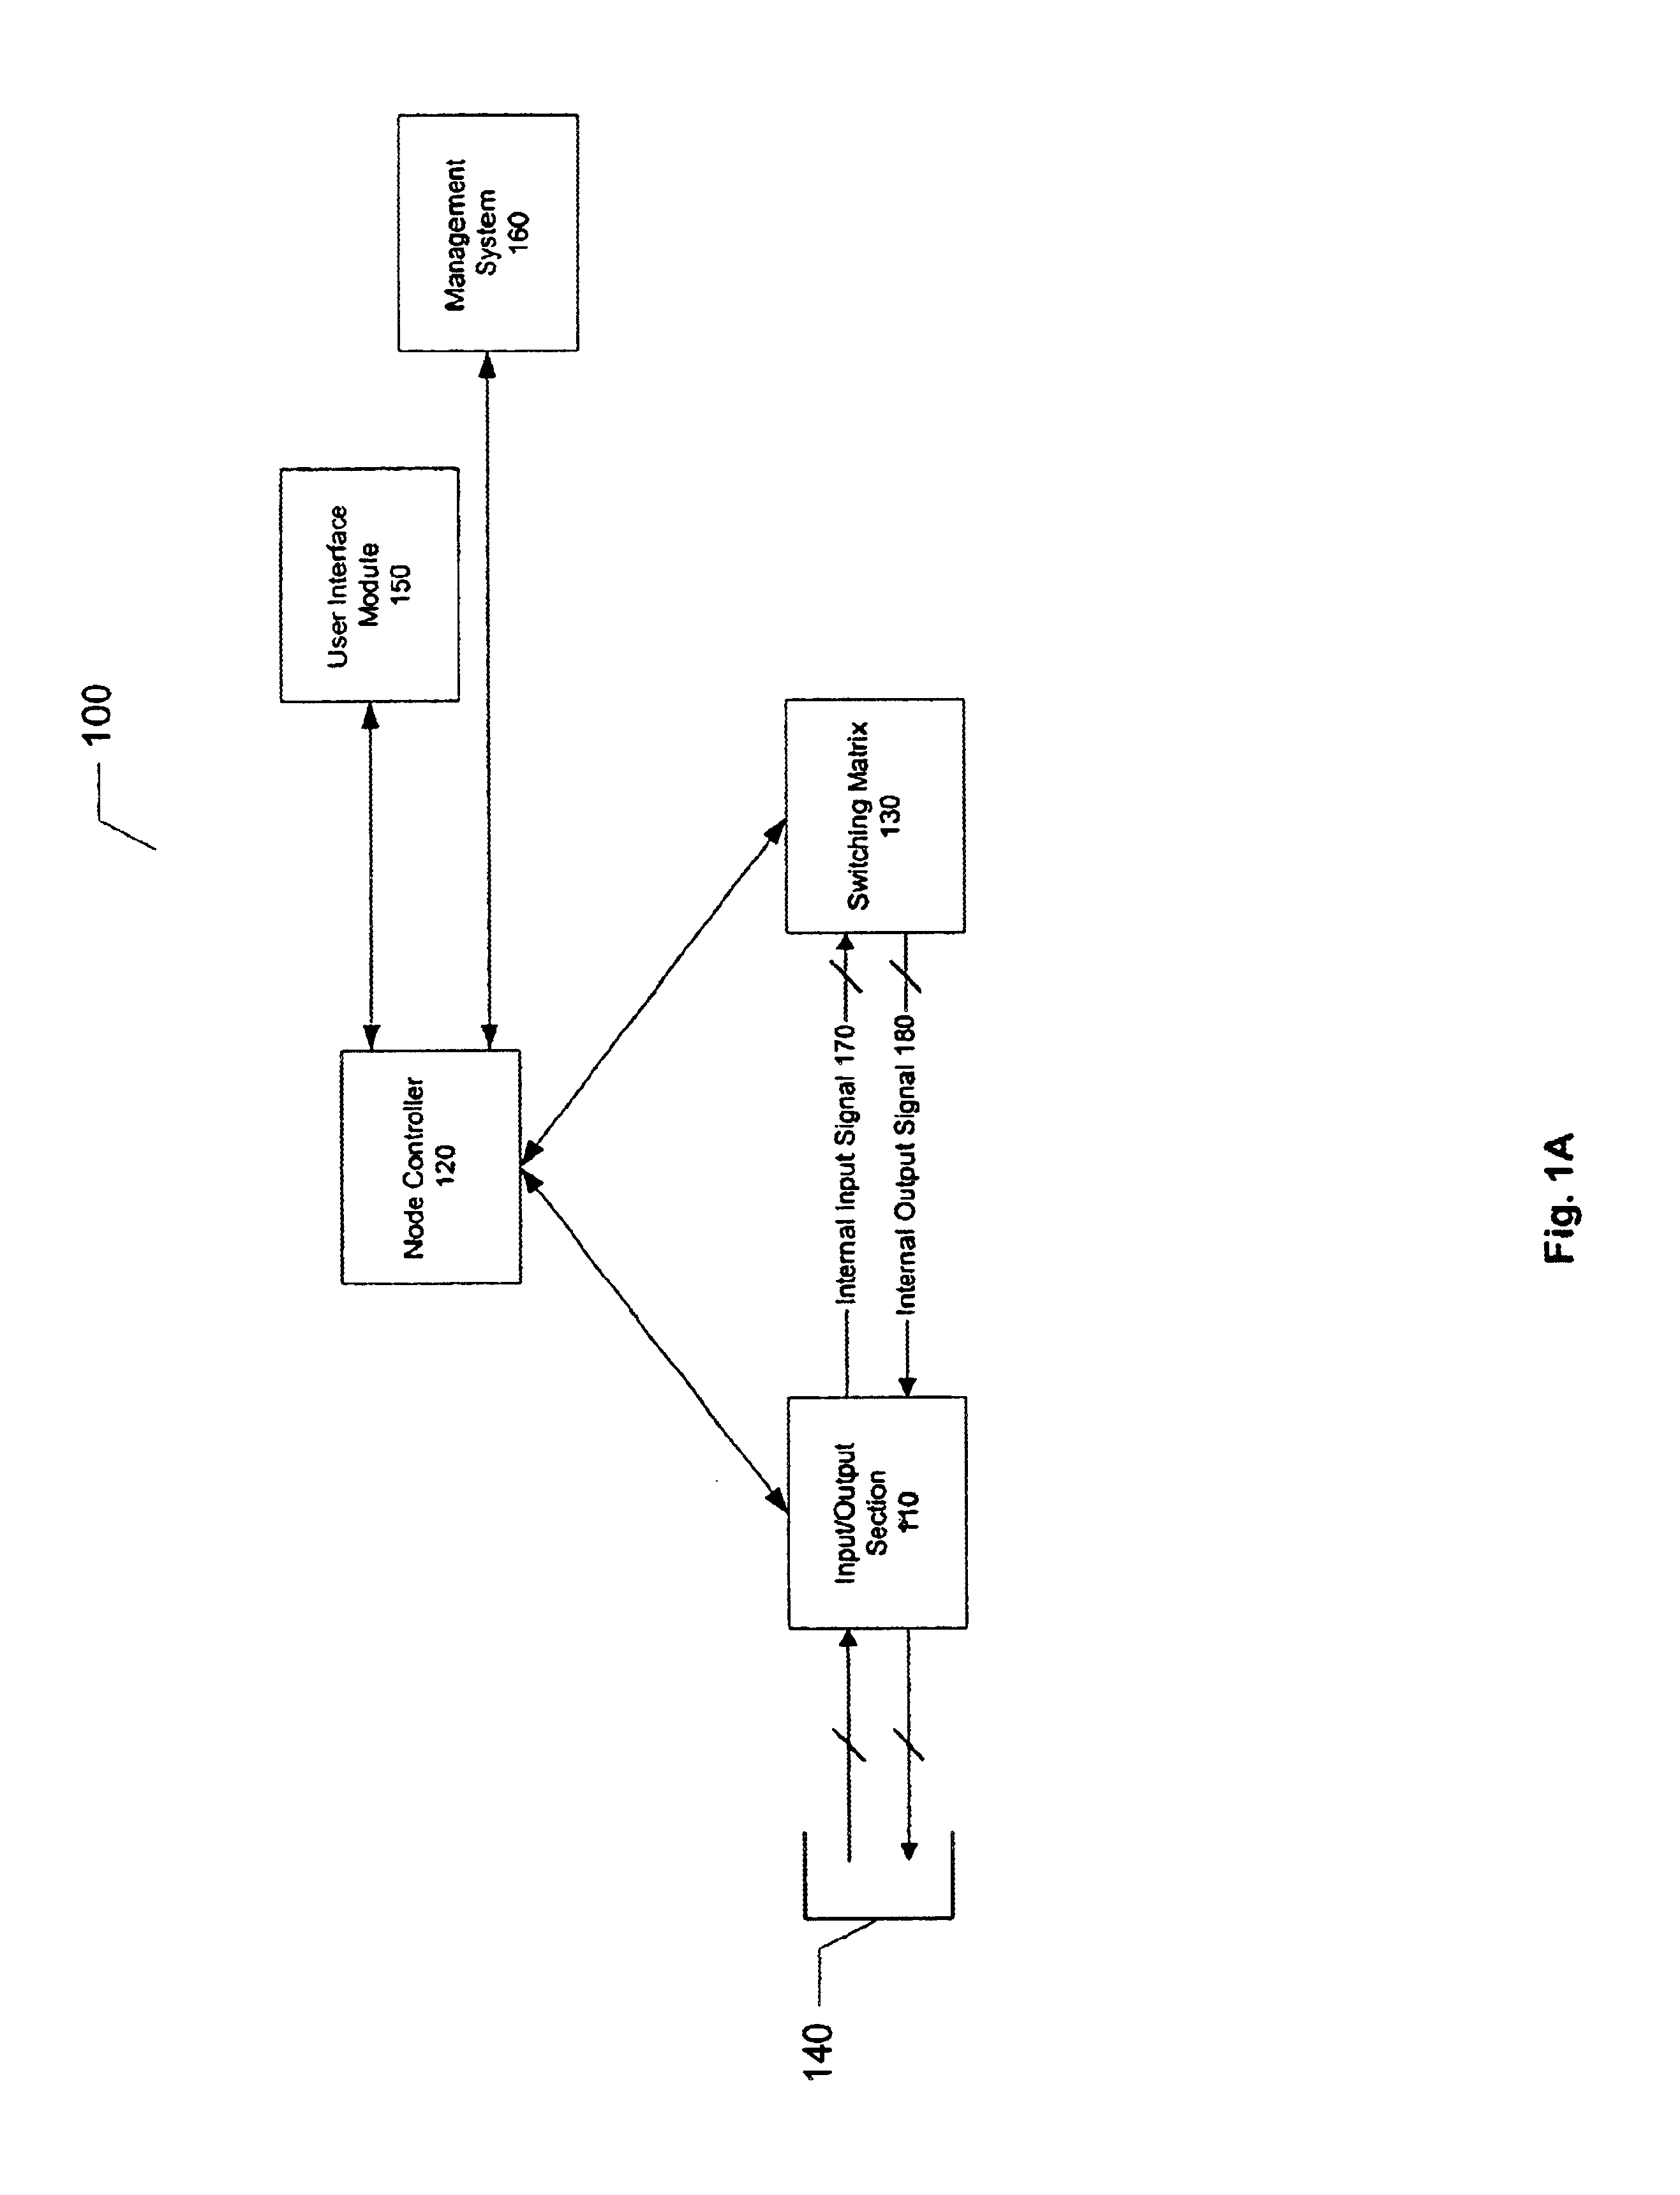 Method and apparatus for isolating faults in a switching matrix